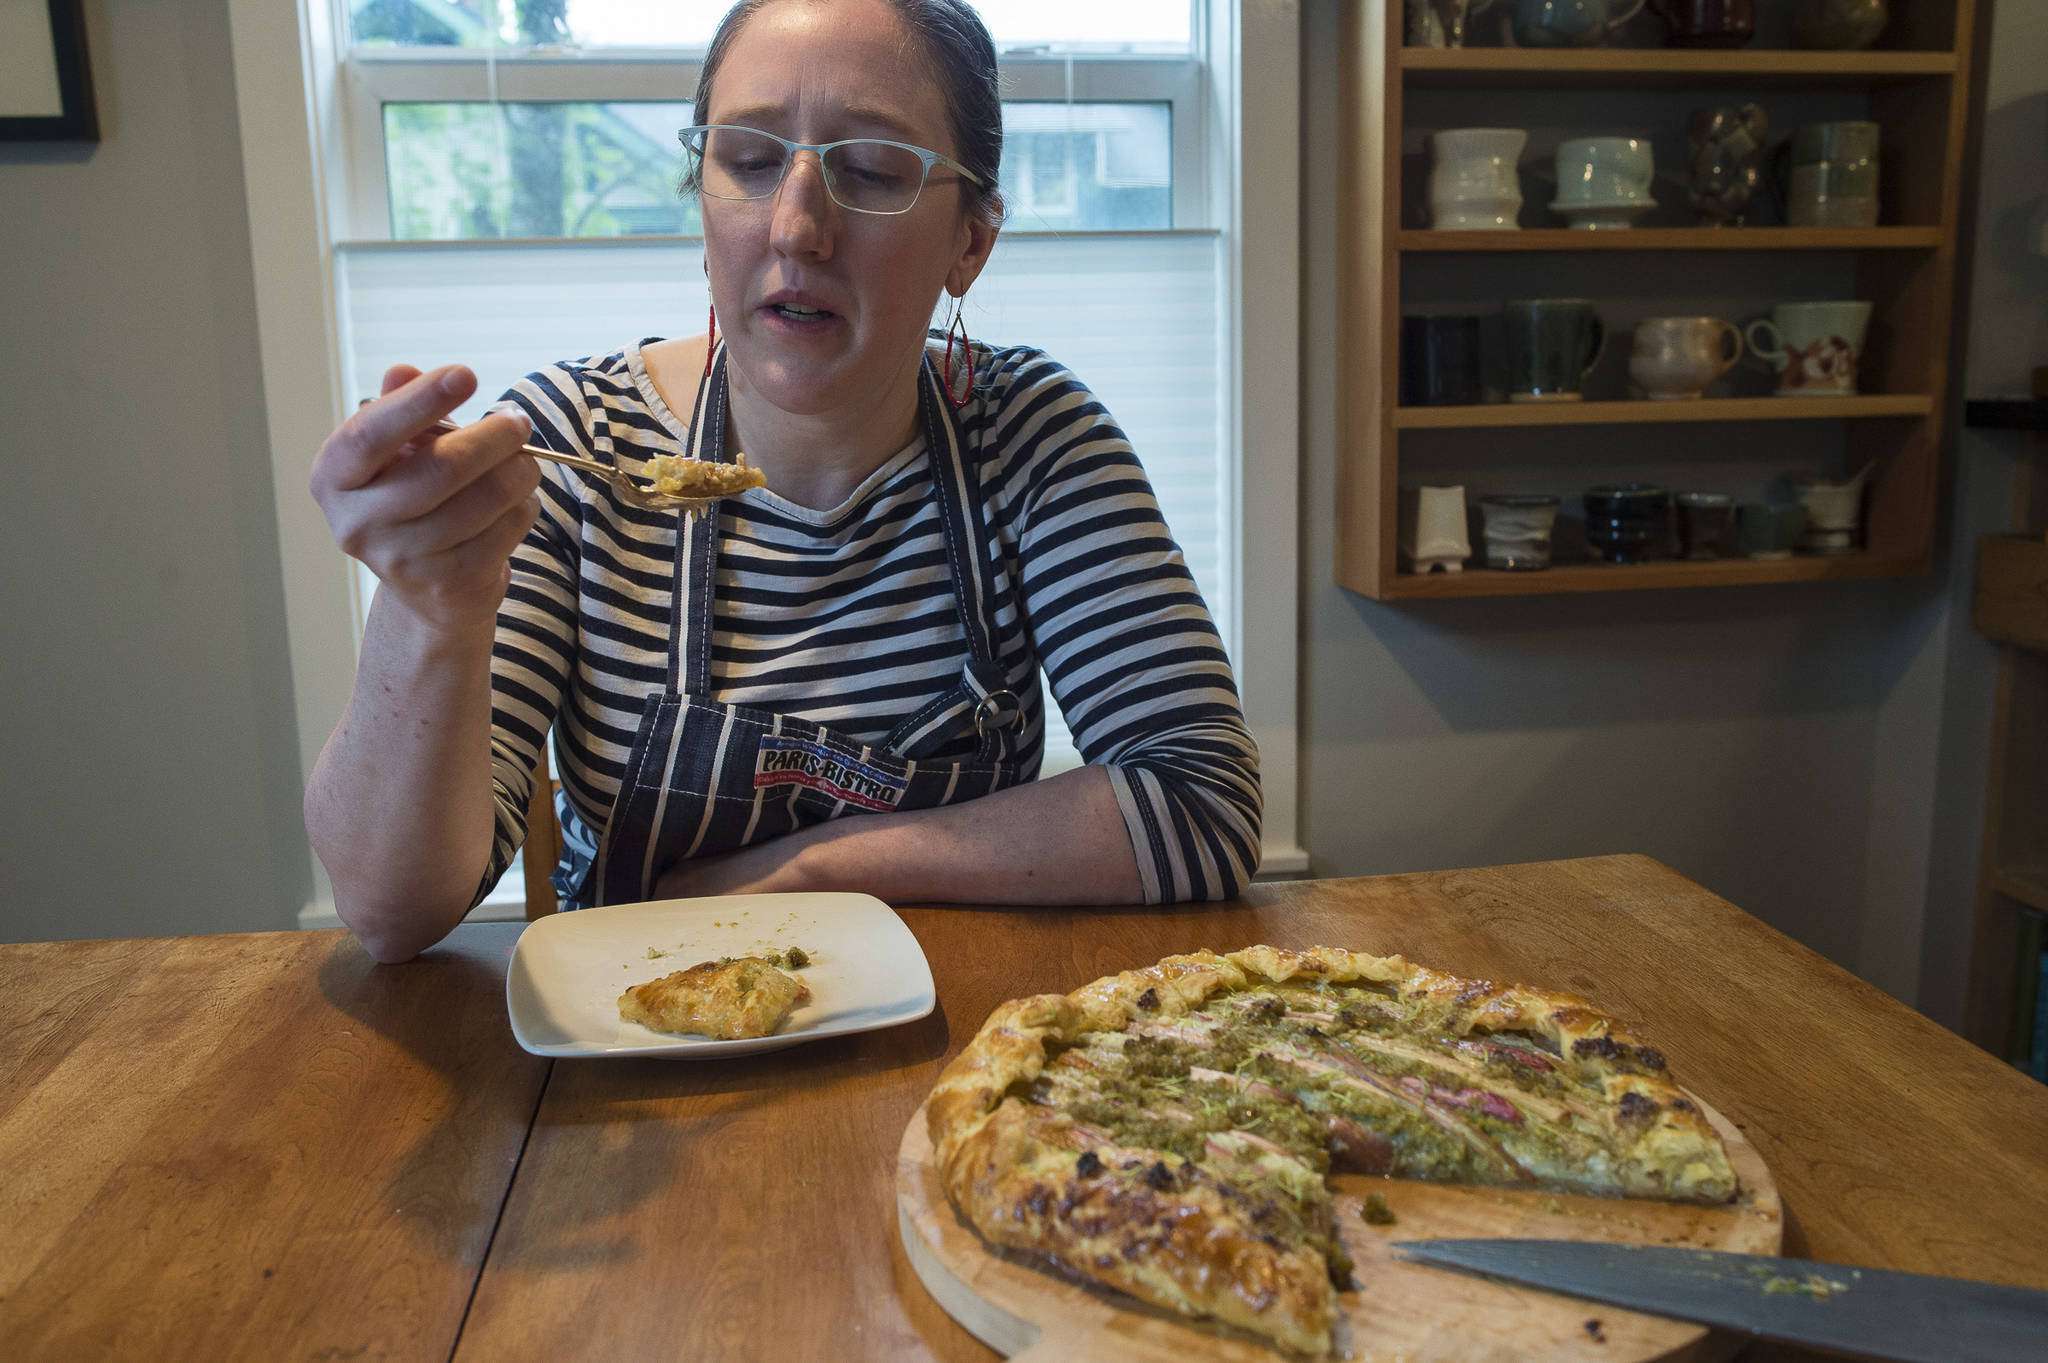 Erin Anais Heist, author of a new cooking column called “Eating Wild” for the Juneau Empire, studies the flavors in her galette made with with rhubarb, spruce tip and ricotta cheese in her home kitchen on Monday, May 21, 2018. (Michael Penn | Juneau Empire)